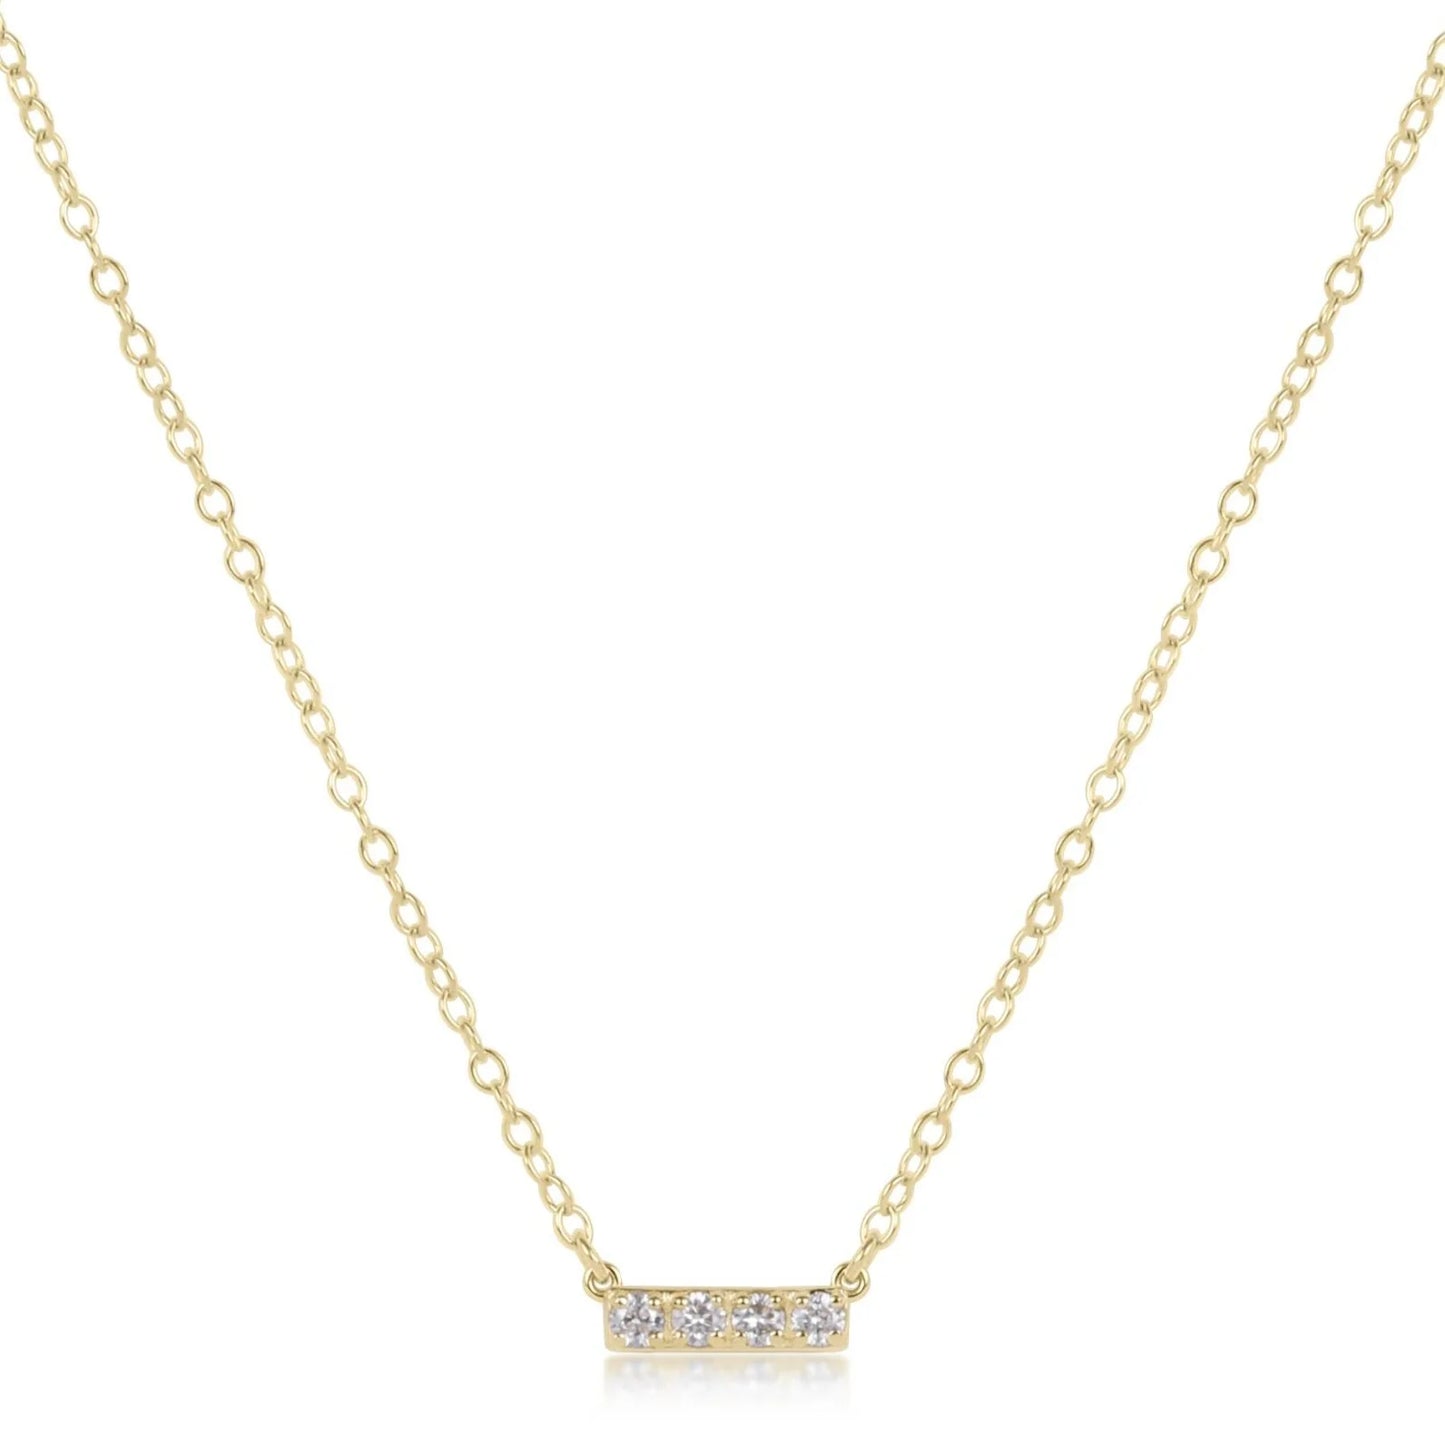 14kt gold and diamond significance bar necklace - four